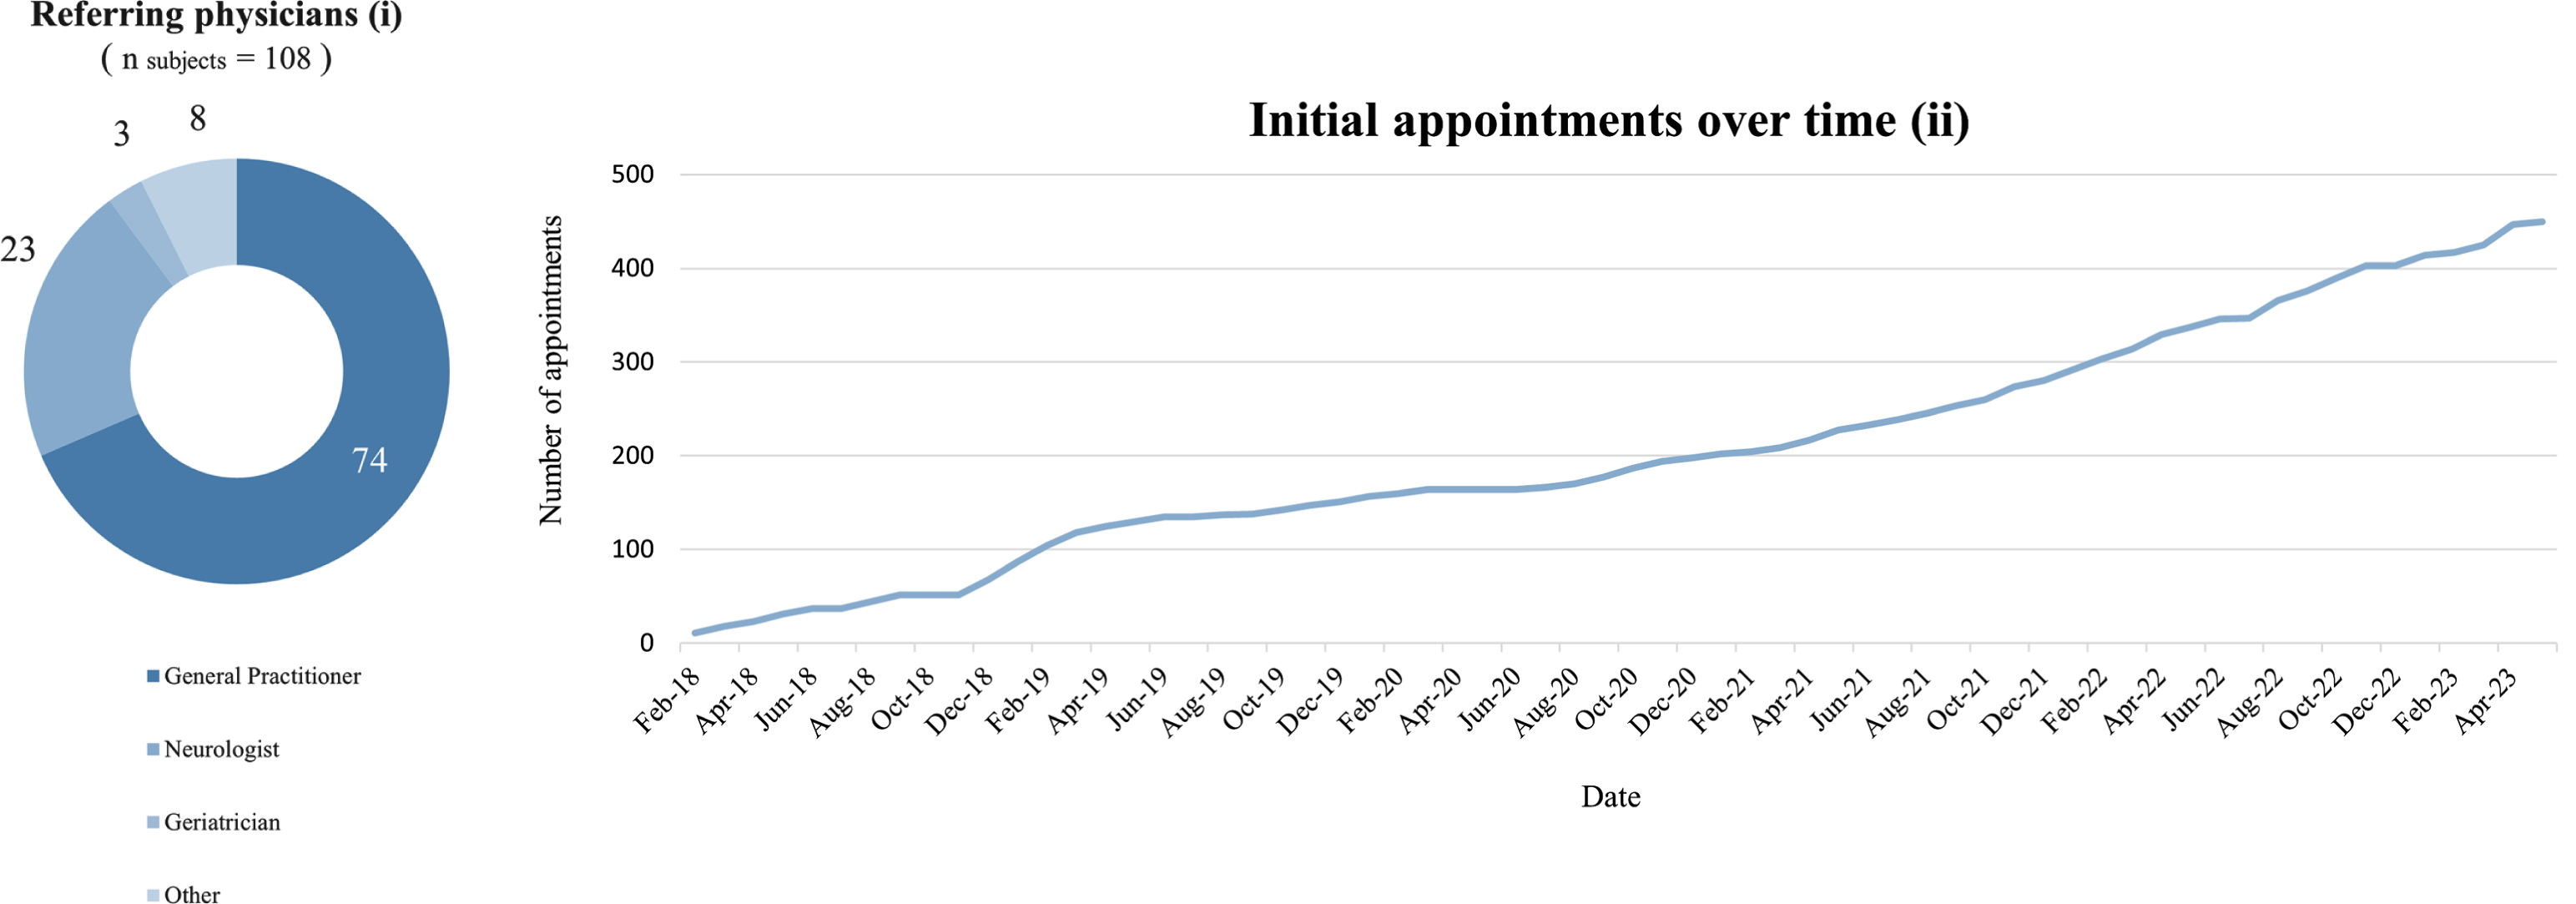 Specialization of referring physicians (i) and cumulative data of initial appointments over time (ii).